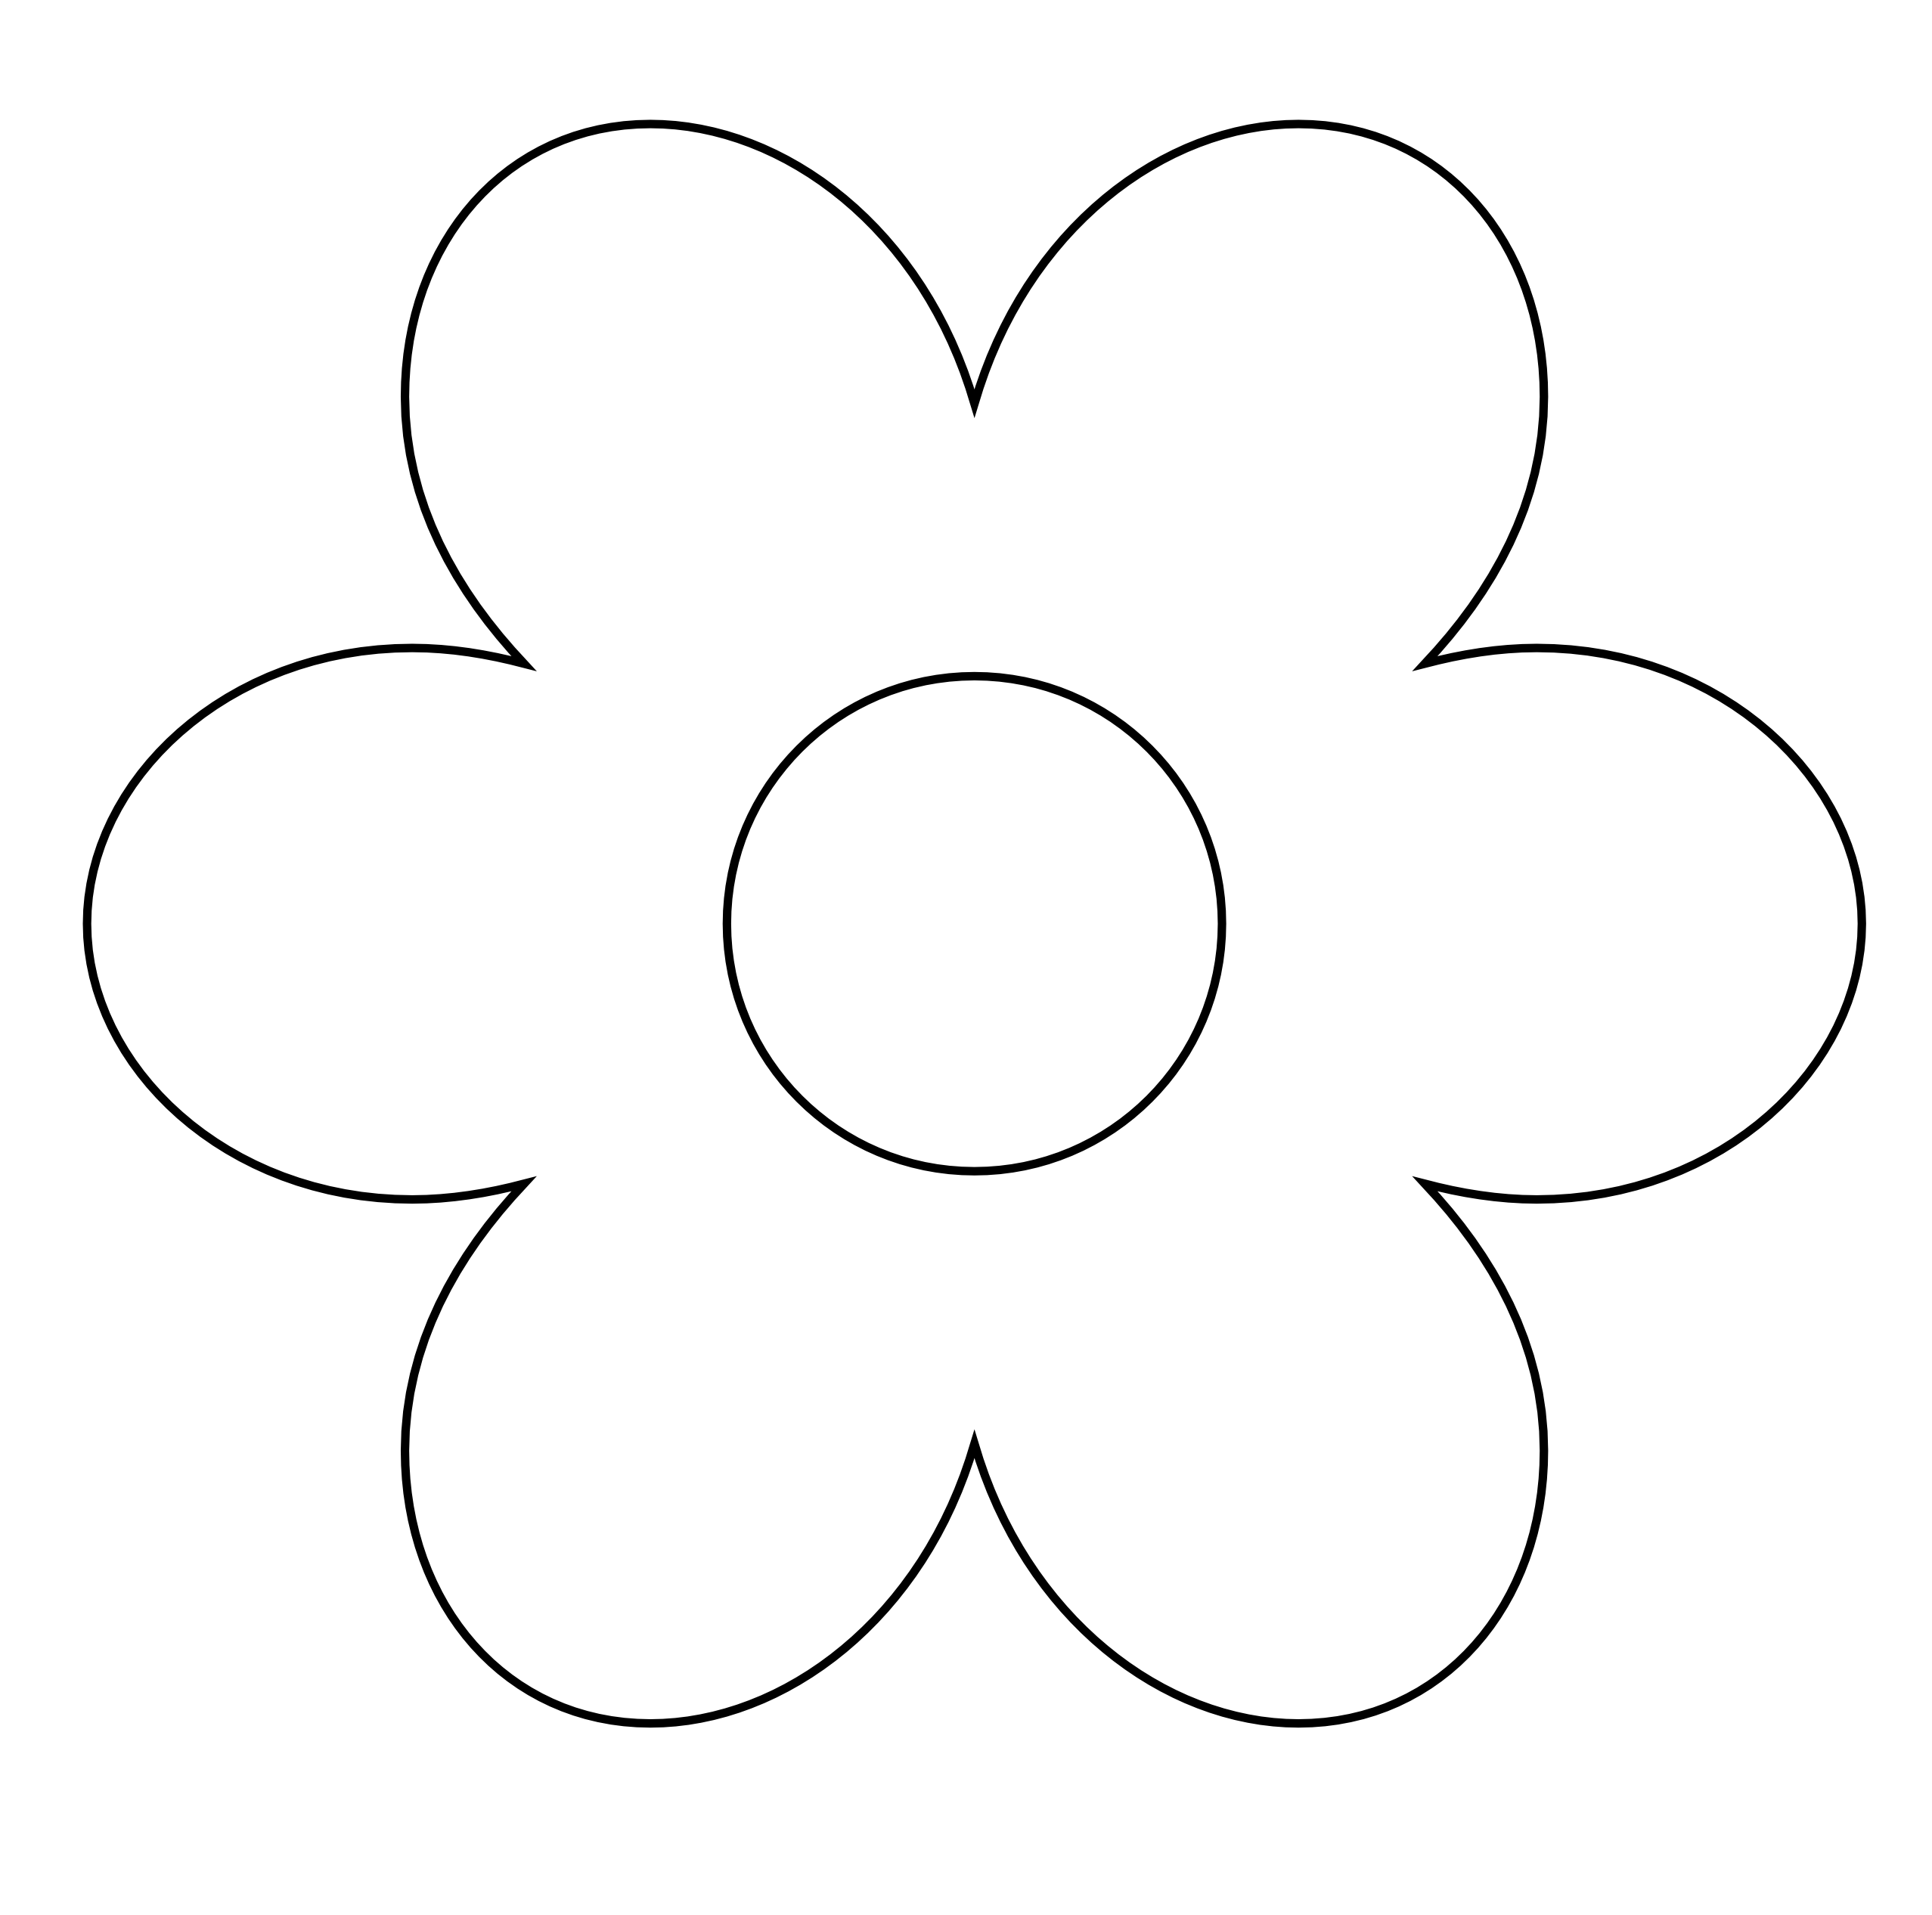 Floral Black And White Flower Clipart PNG Transparent Background, Free  Download #41808 - FreeIconsPNG